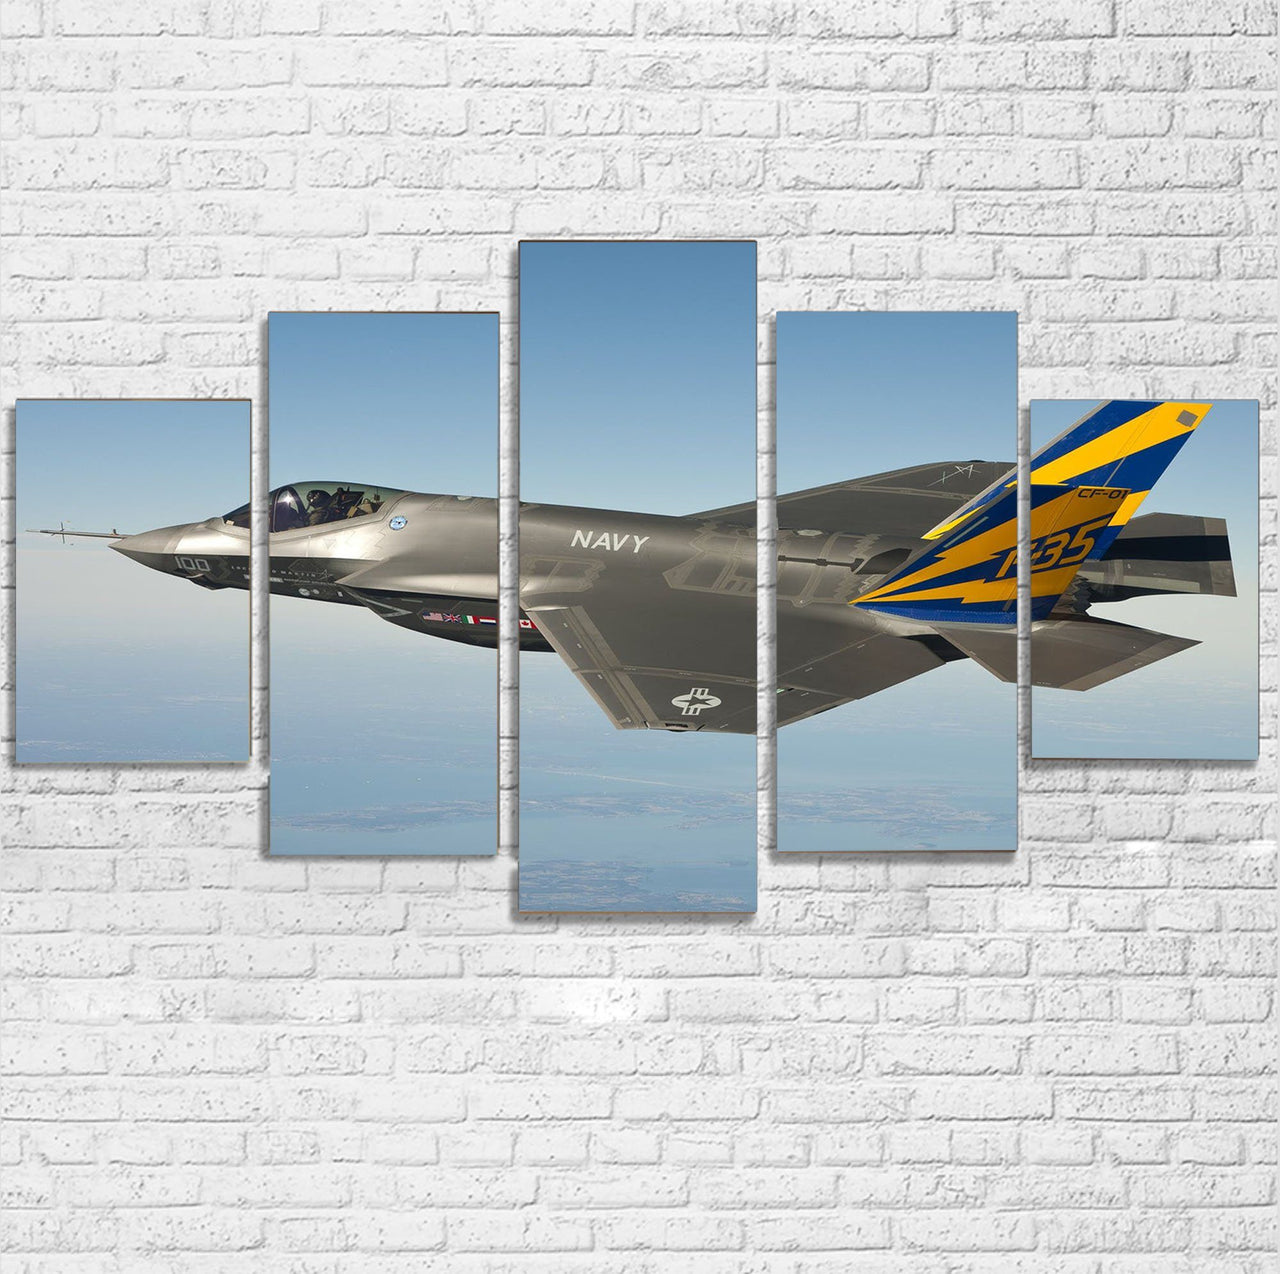 Cruising Fighting Falcon F35 Printed Multiple Canvas Poster Aviation Shop 